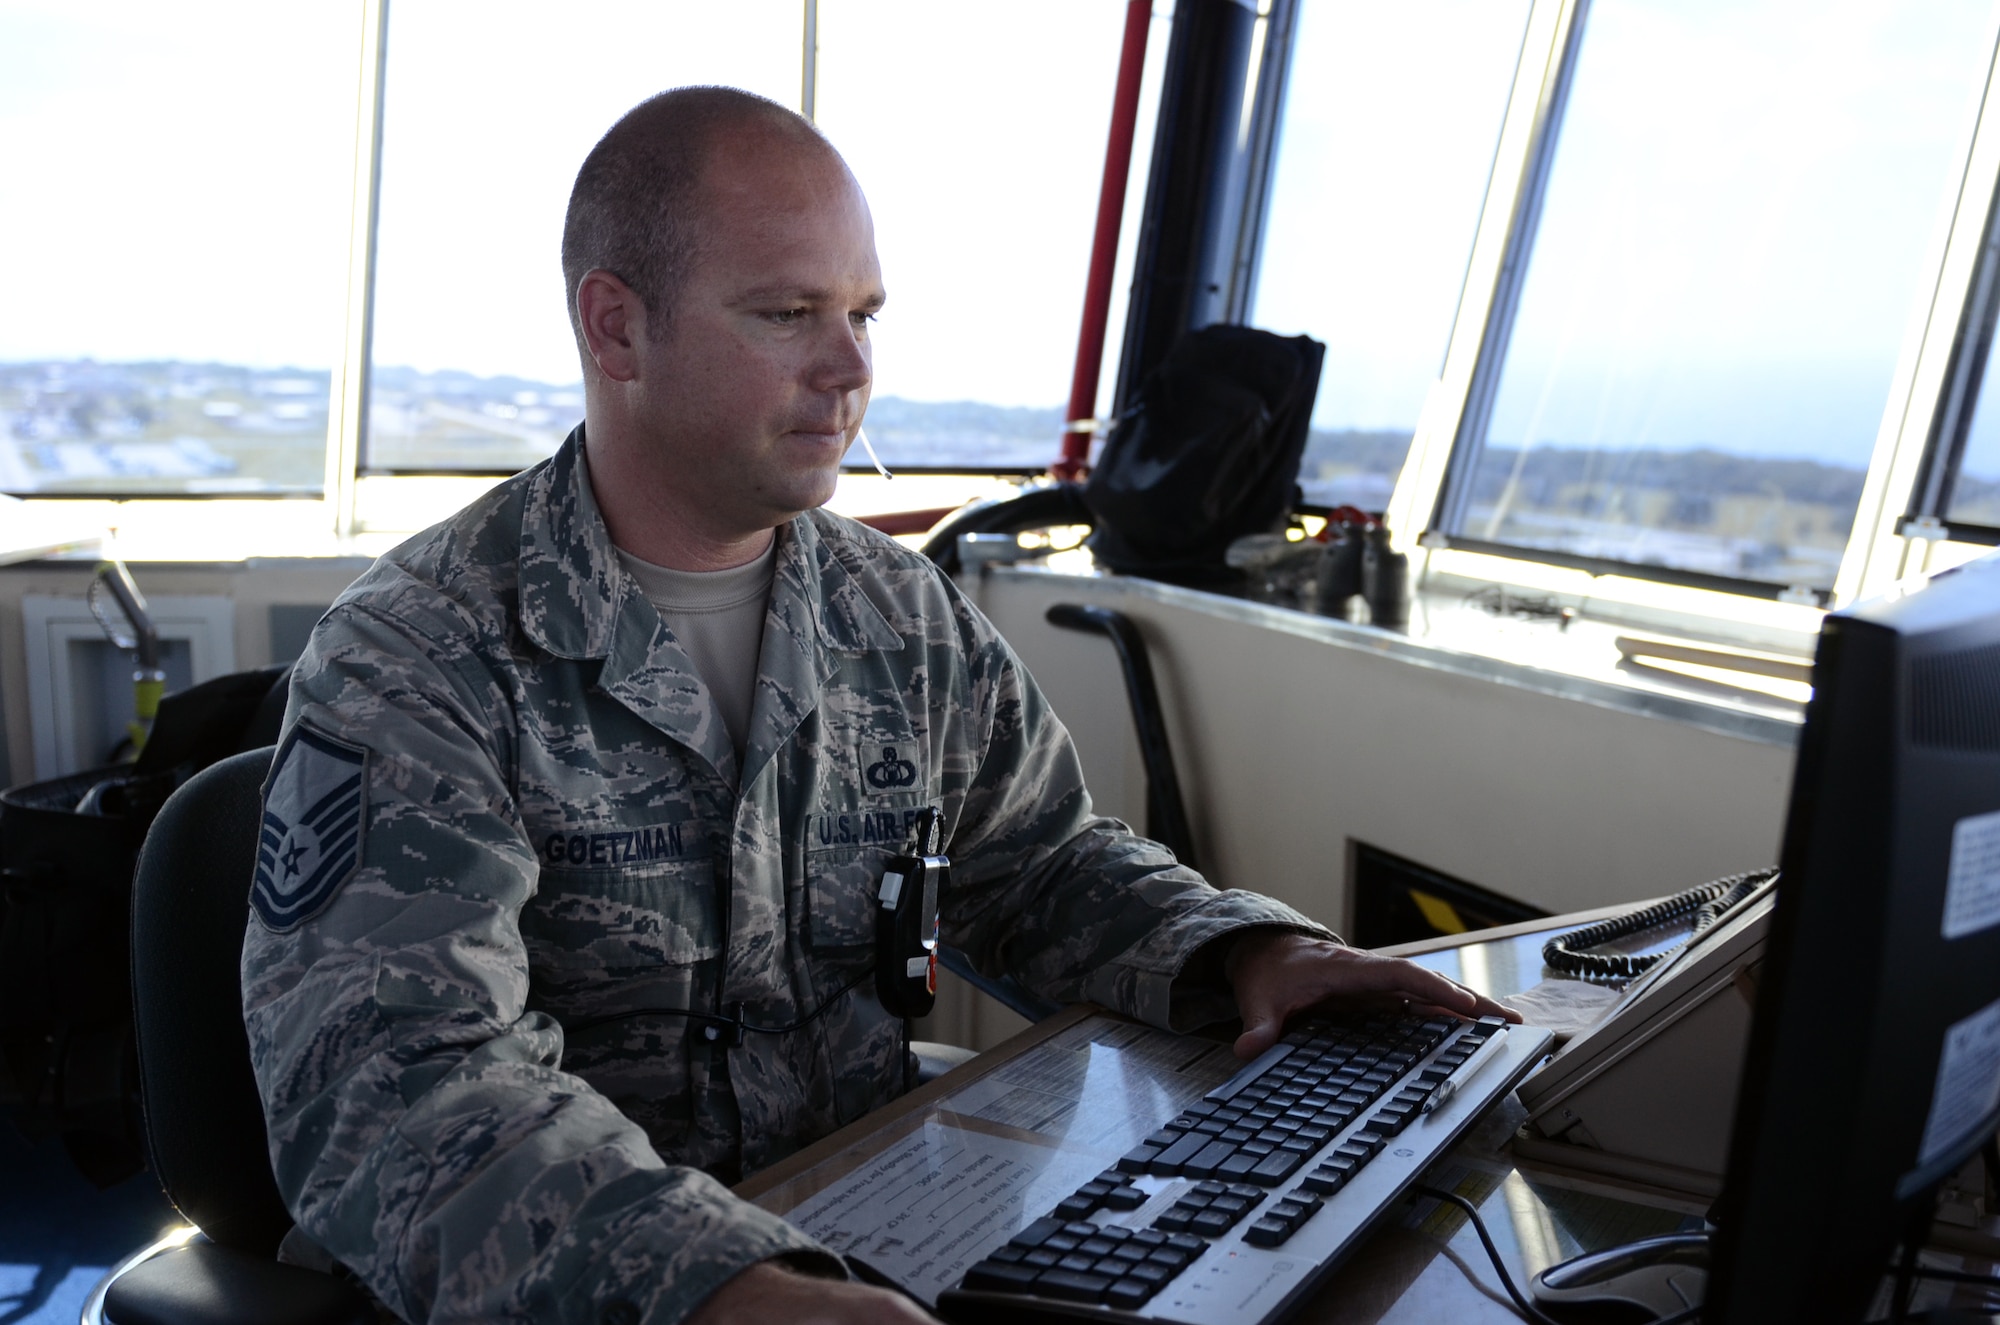 Master Sgt. Shelby Goetzman, 36th Operations Support Squadron chief controller, logs in mission information on Andersen Air Force Base, Guam, April 23, 2015. Andersen air traffic controllers work with deployed aircraft and occasionally foreign aircraft to support Andersen’s mission on a daily basis. (U.S. Air Force photo by Airman 1st Class Alexa Ann Henderson/Released)